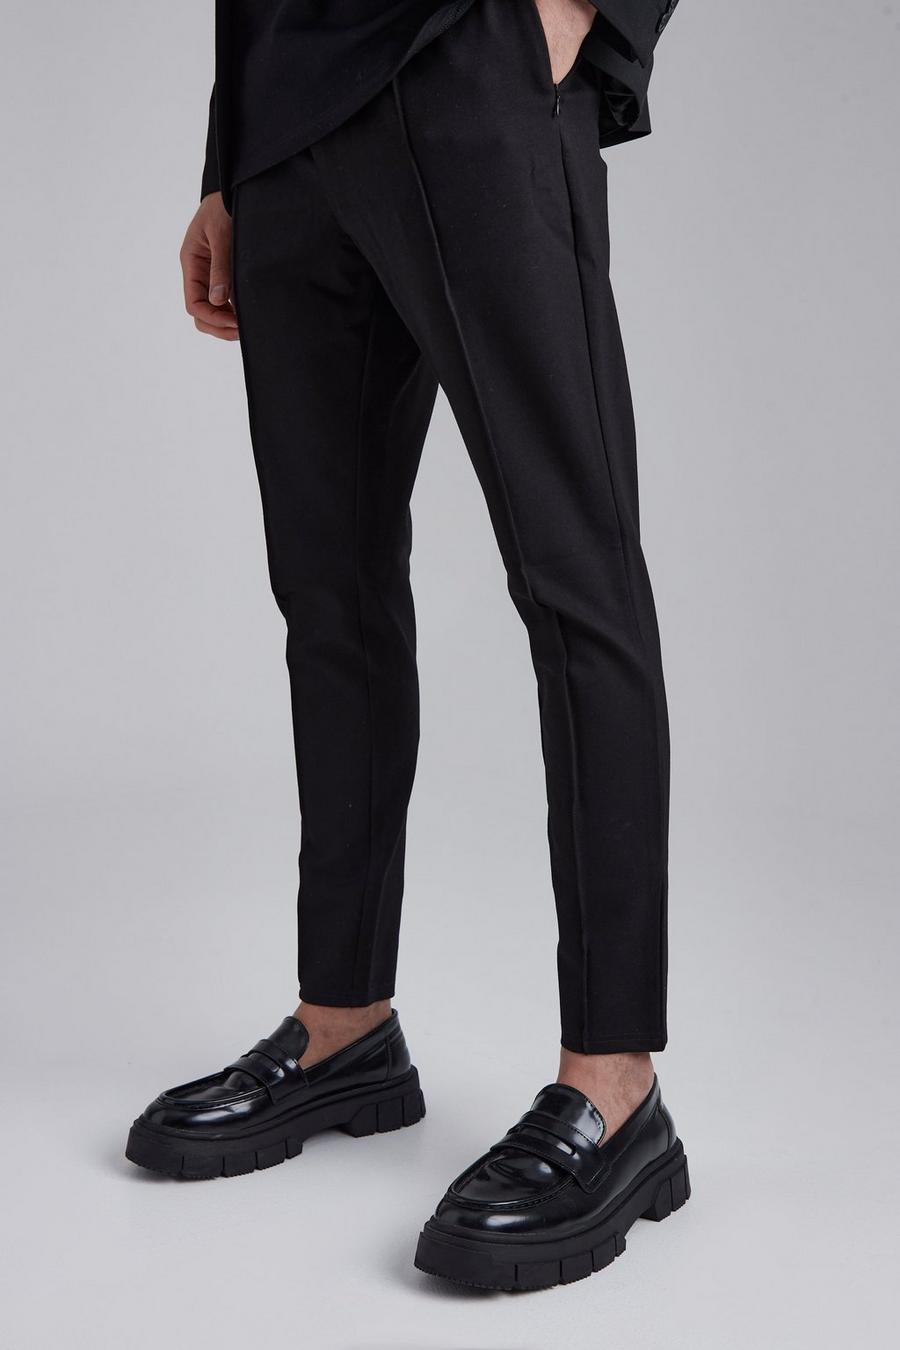 Black Slim Fit Luxe Jogger